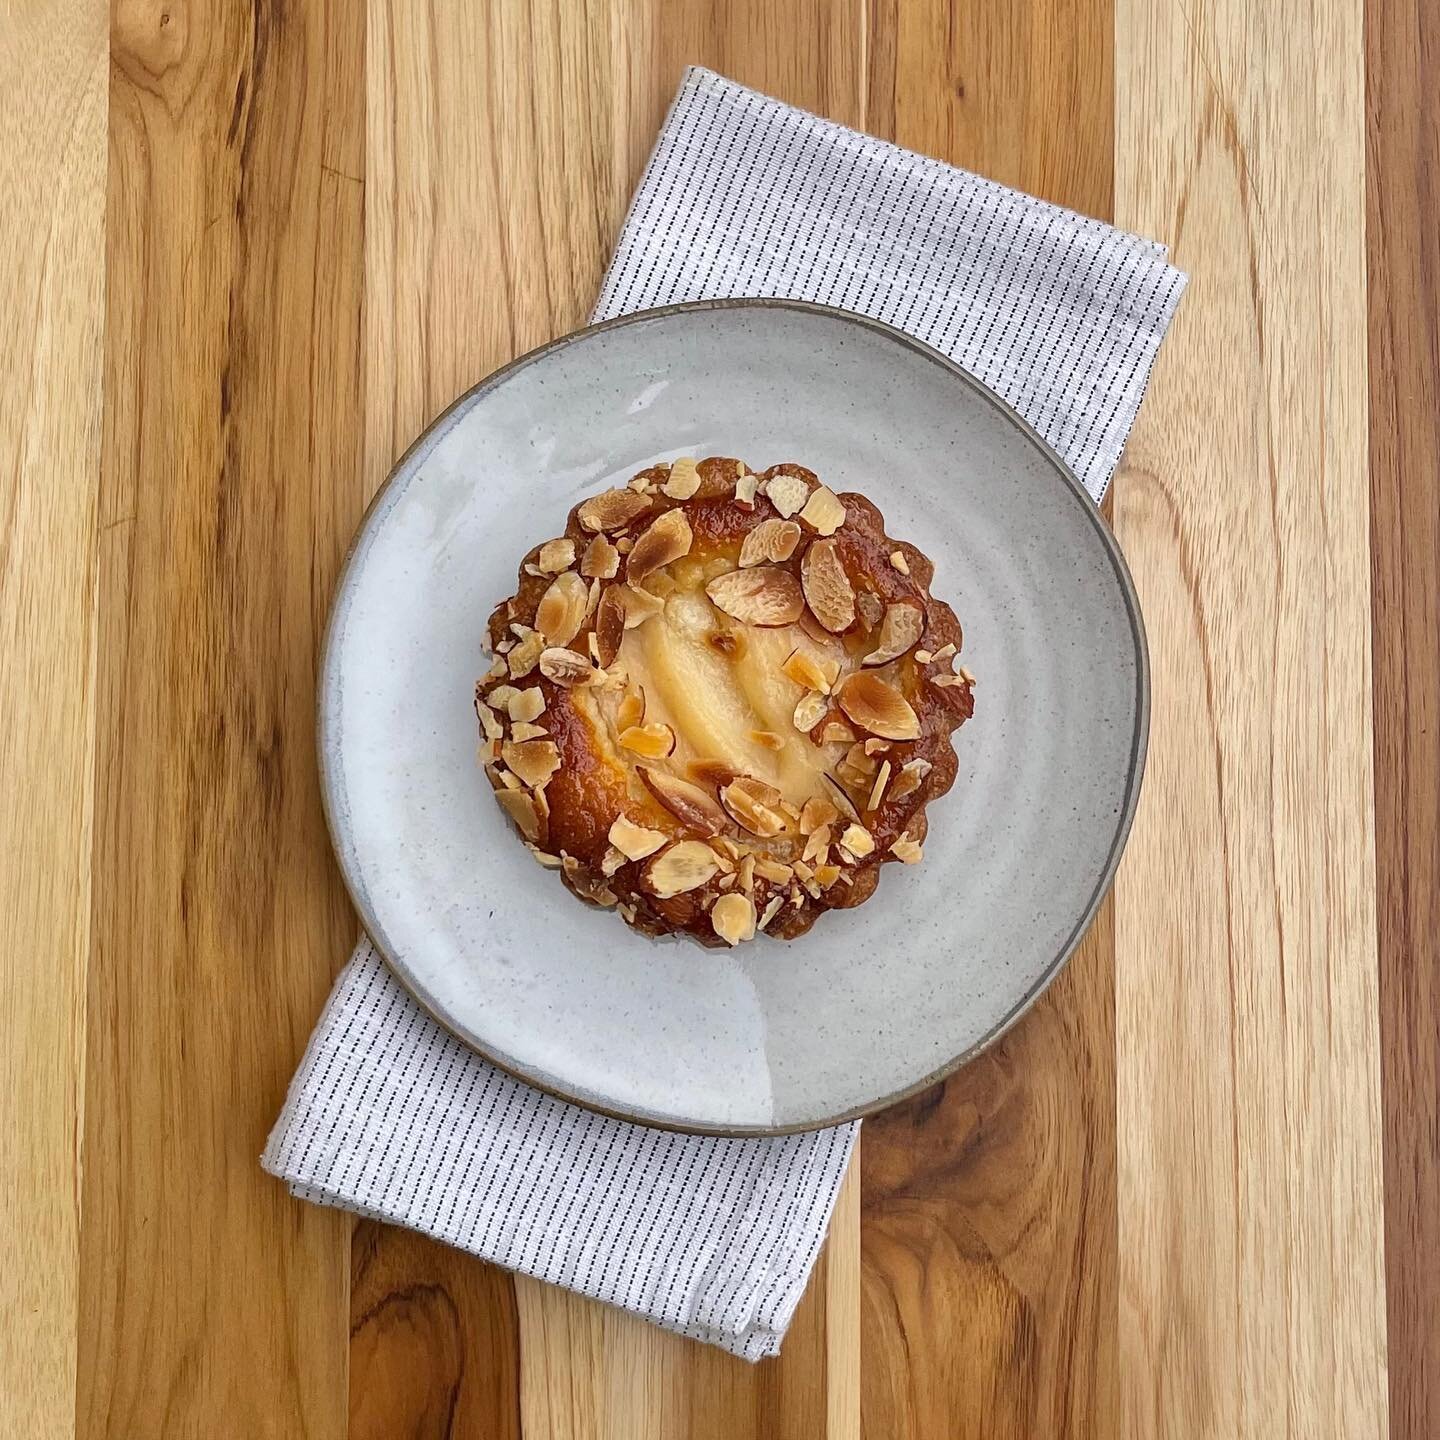 Any day is a pear-fect day for our Pear Almond Tart 🤤

PS: We&rsquo;re offering unlimited free delivery from Foode Tech Center for the month of October! Use coupon code &ldquo;HELLOFALL&rdquo;

*Only valid for orders placed at Foode Tech Center. Off